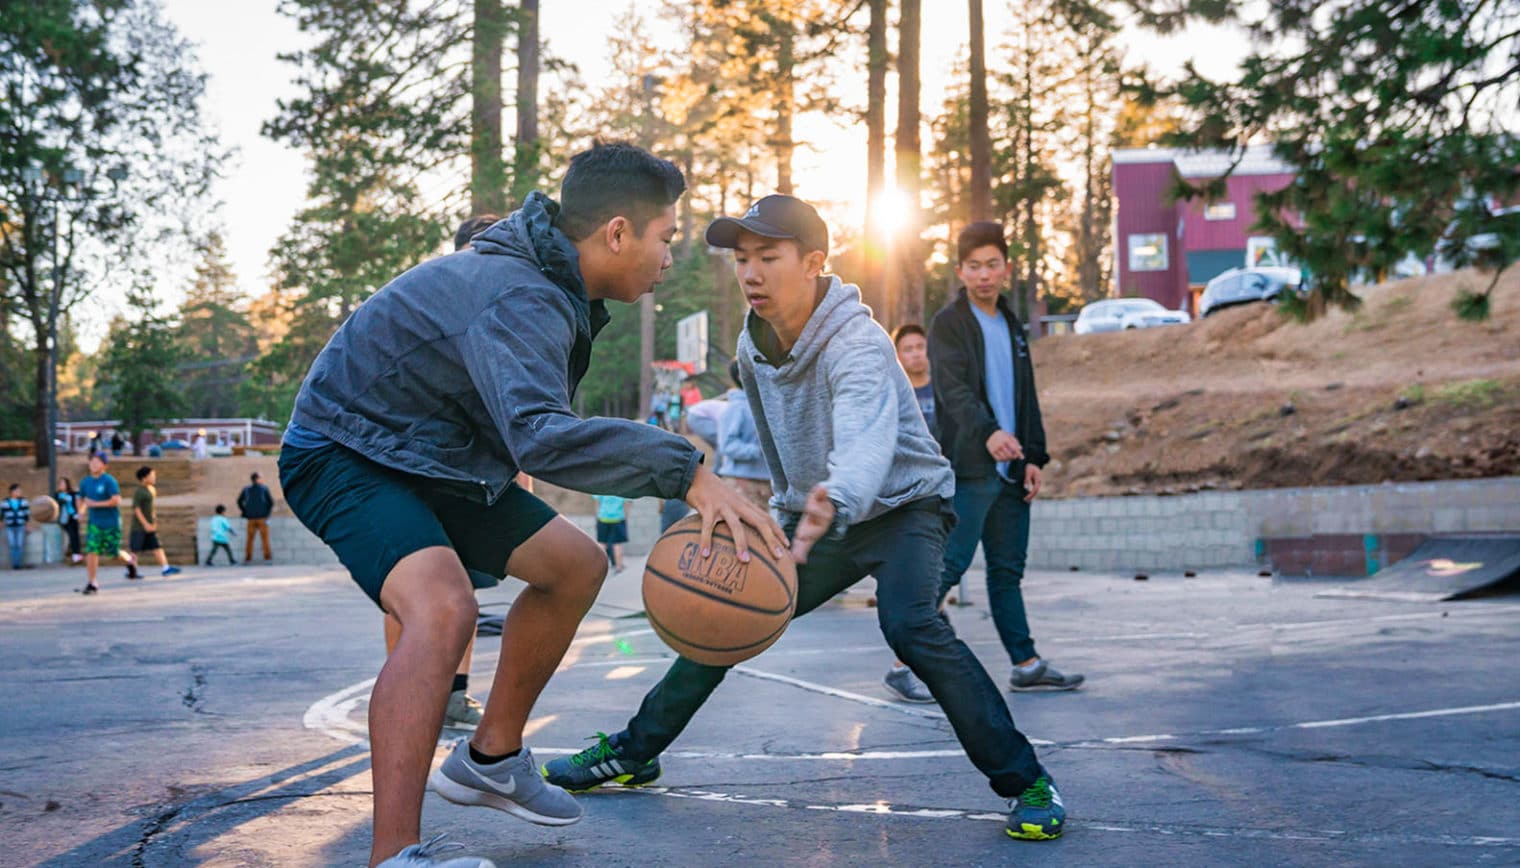 A group of people playing basketball.